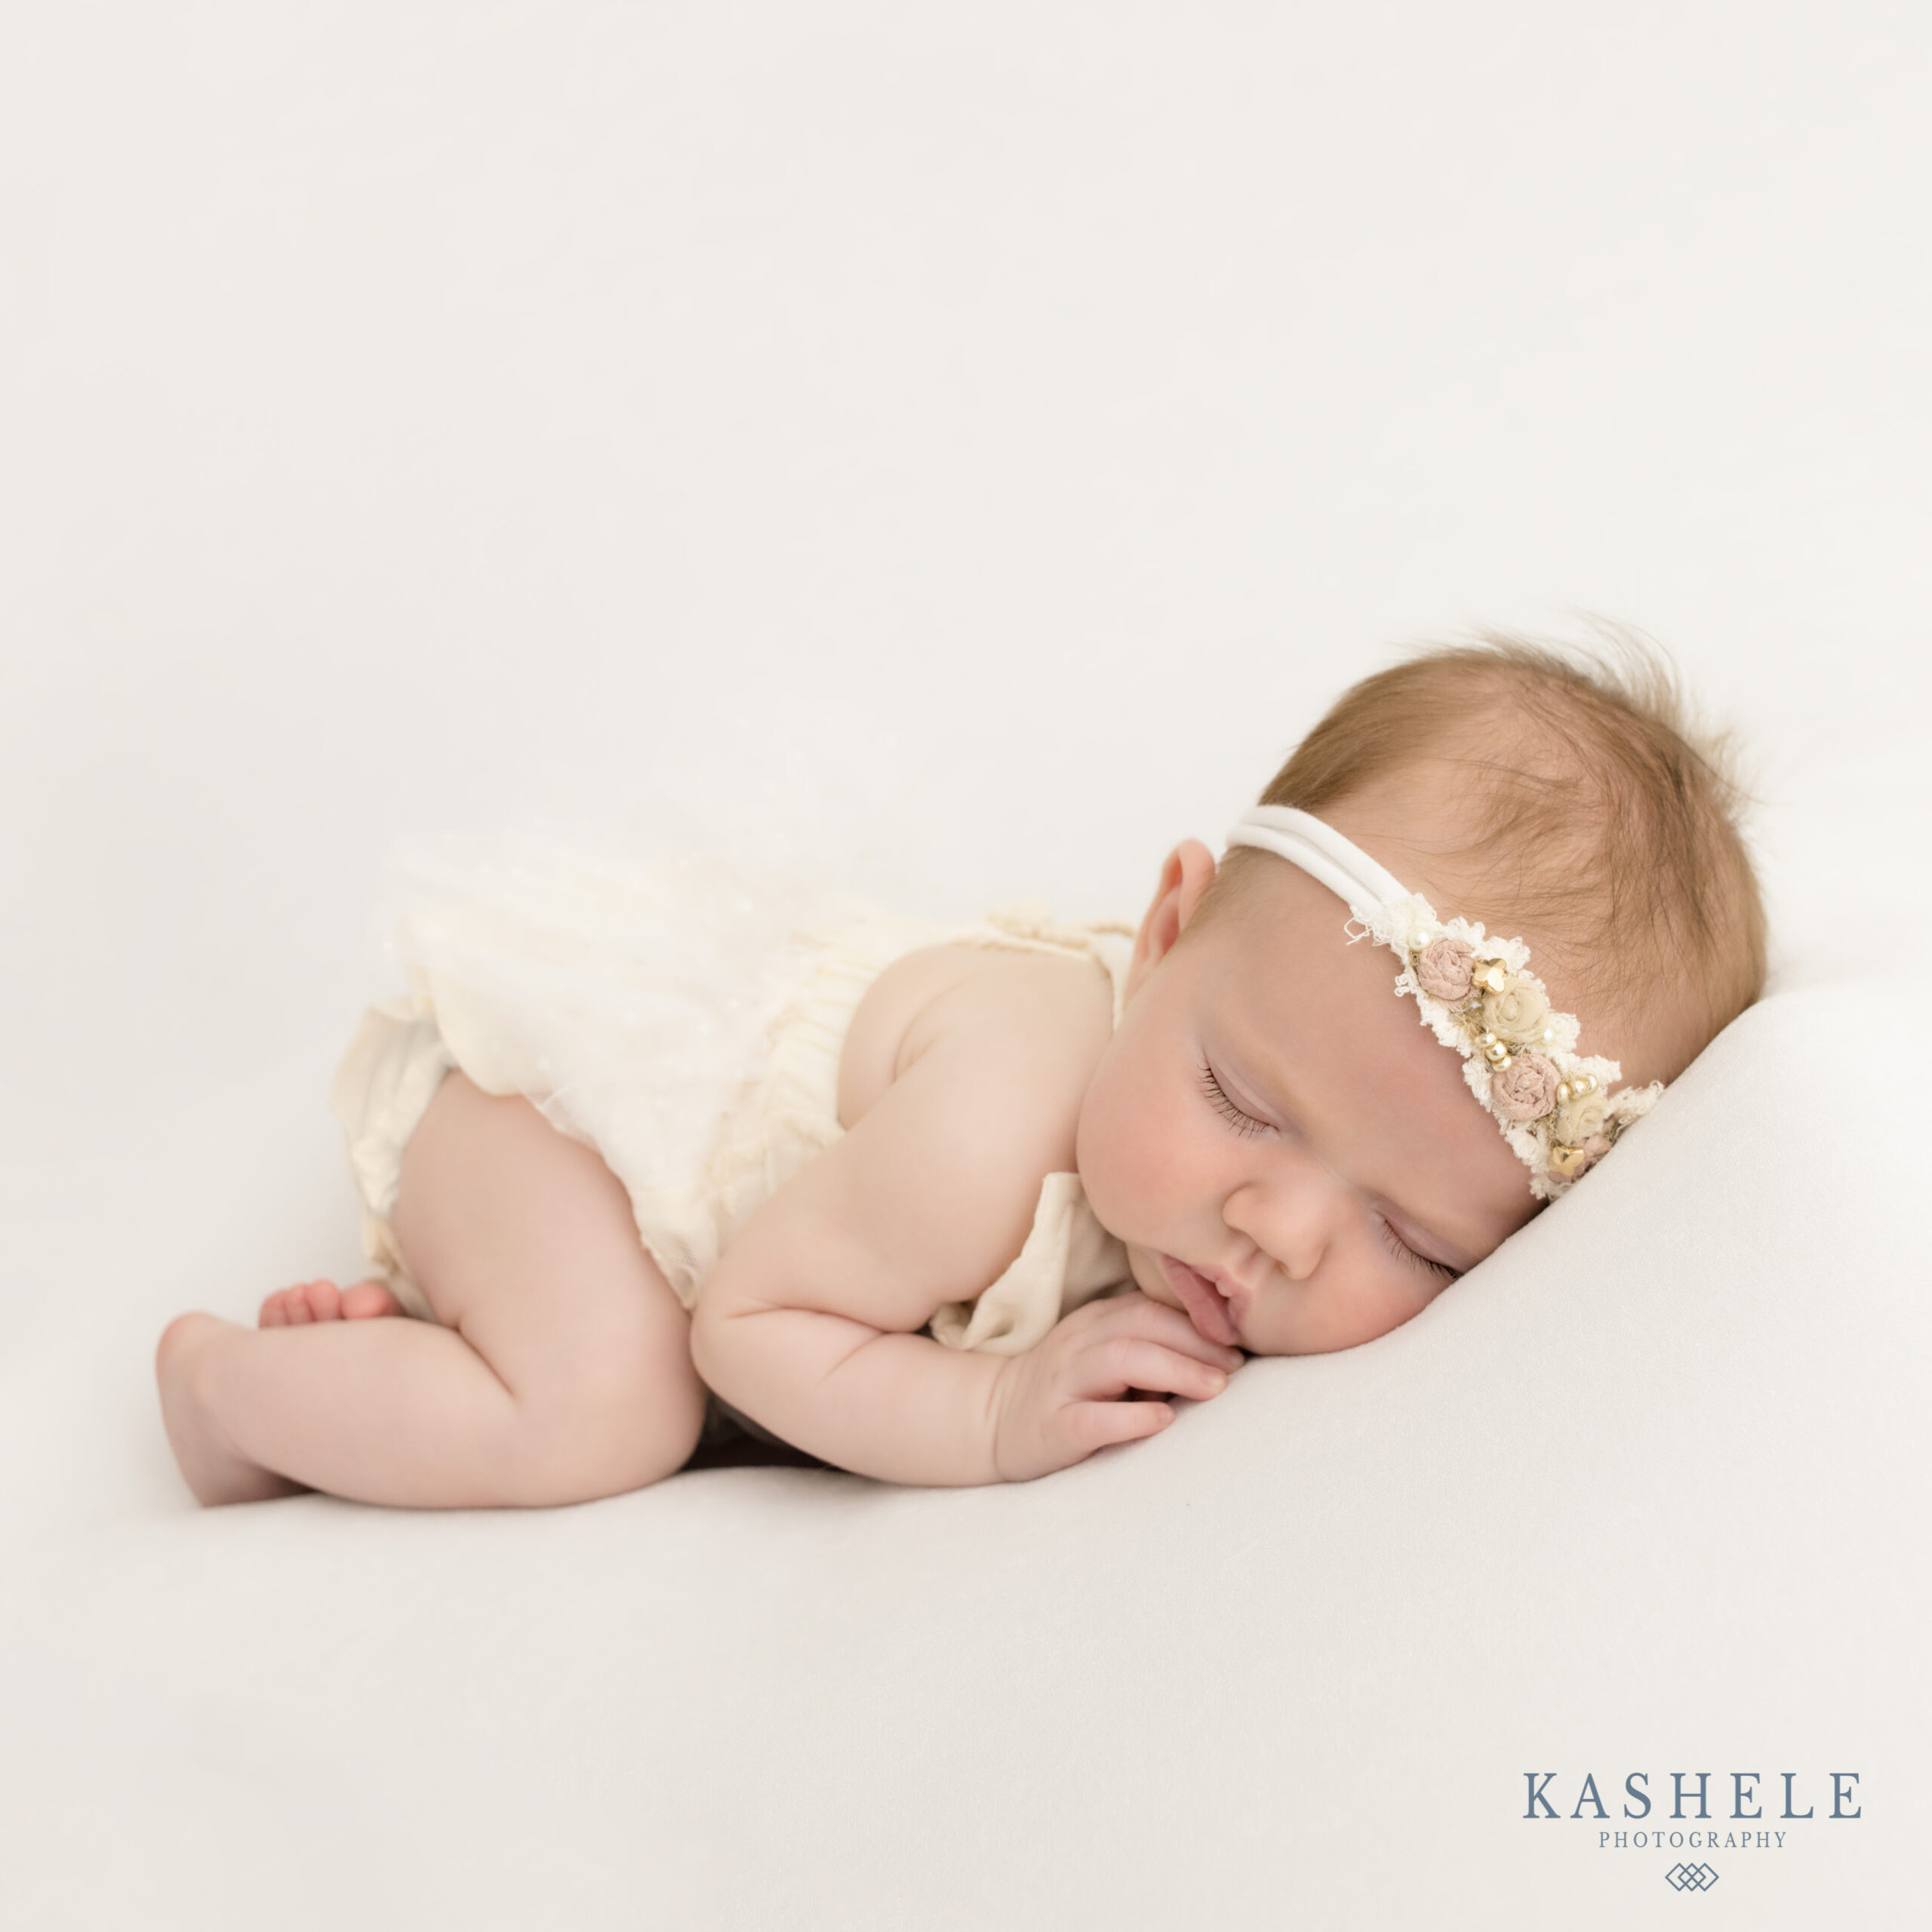 3-Month-Old Photo Ideas to Hold Precious Moments